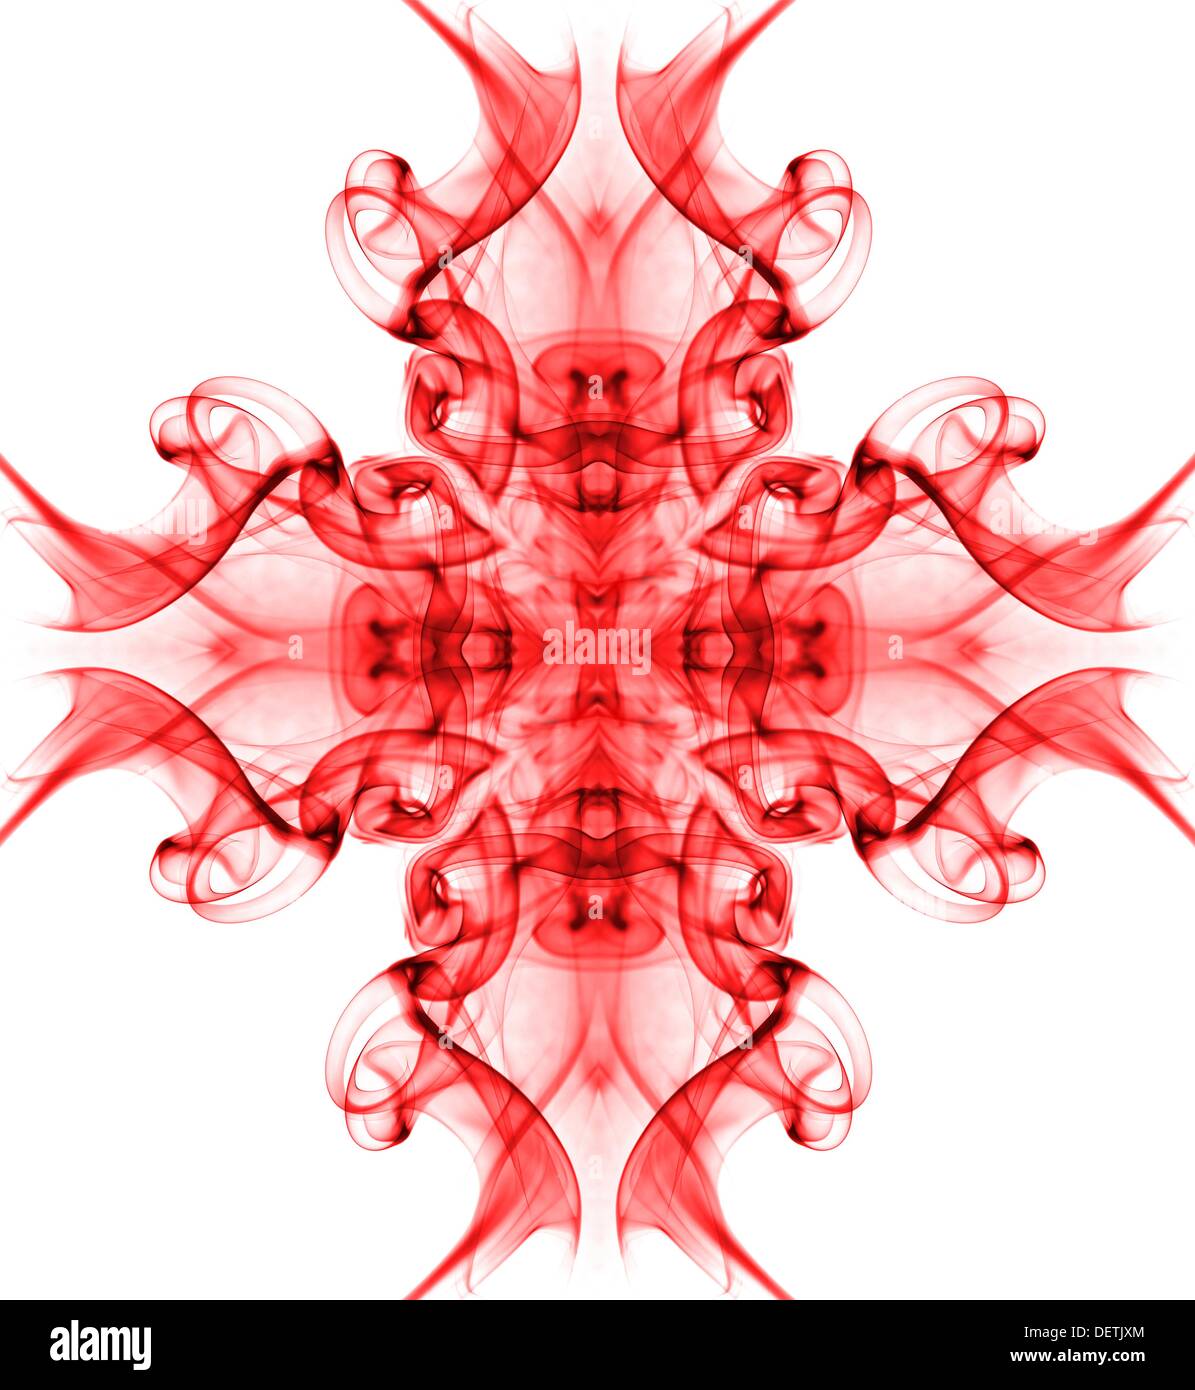 Symmetrical form of red on white background Stock Photo